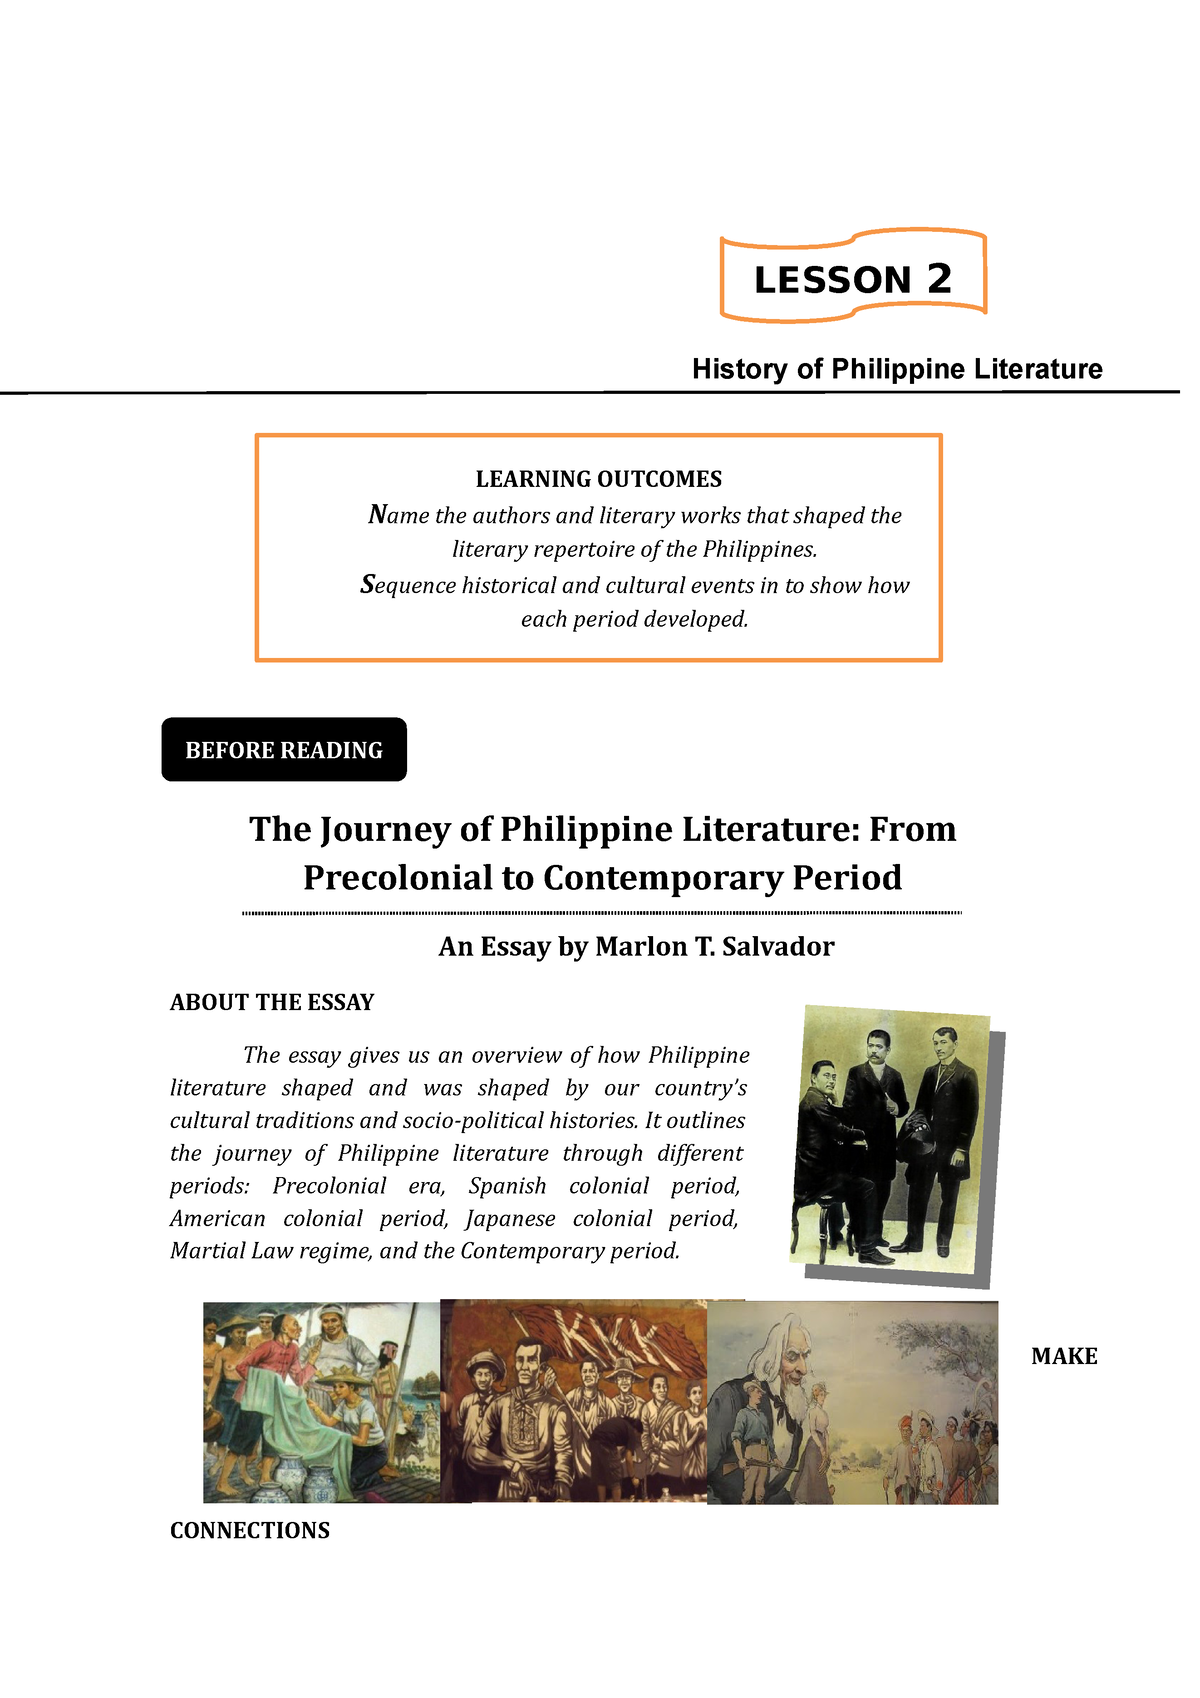 importance of studying philippine literature essay